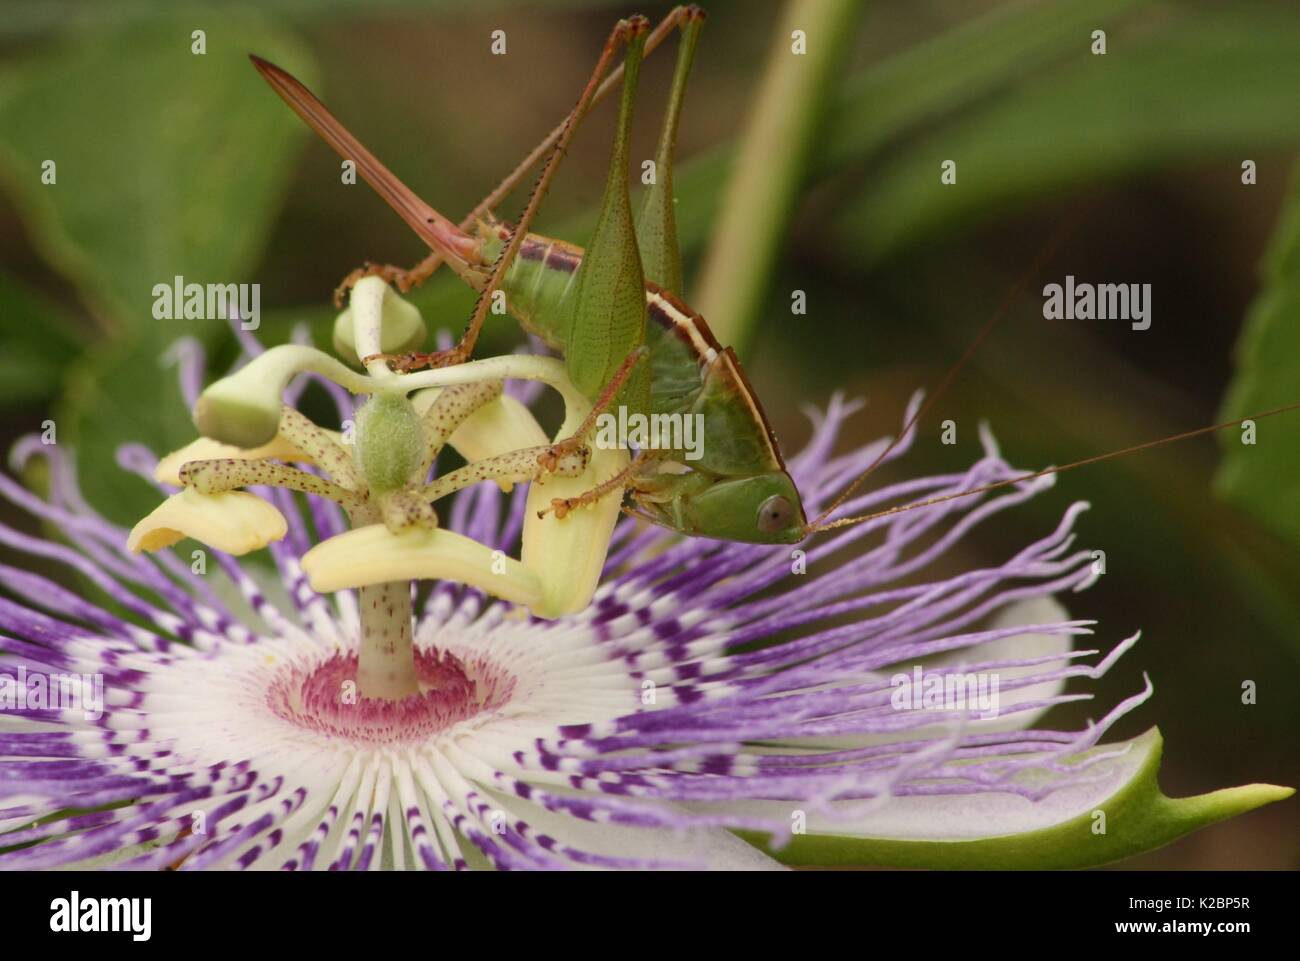 A green grasshopper or katydid climbing on and eating a beautiful purple Passion Flower found in a meadow while hiking in the Ocala, Florida area. Stock Photo